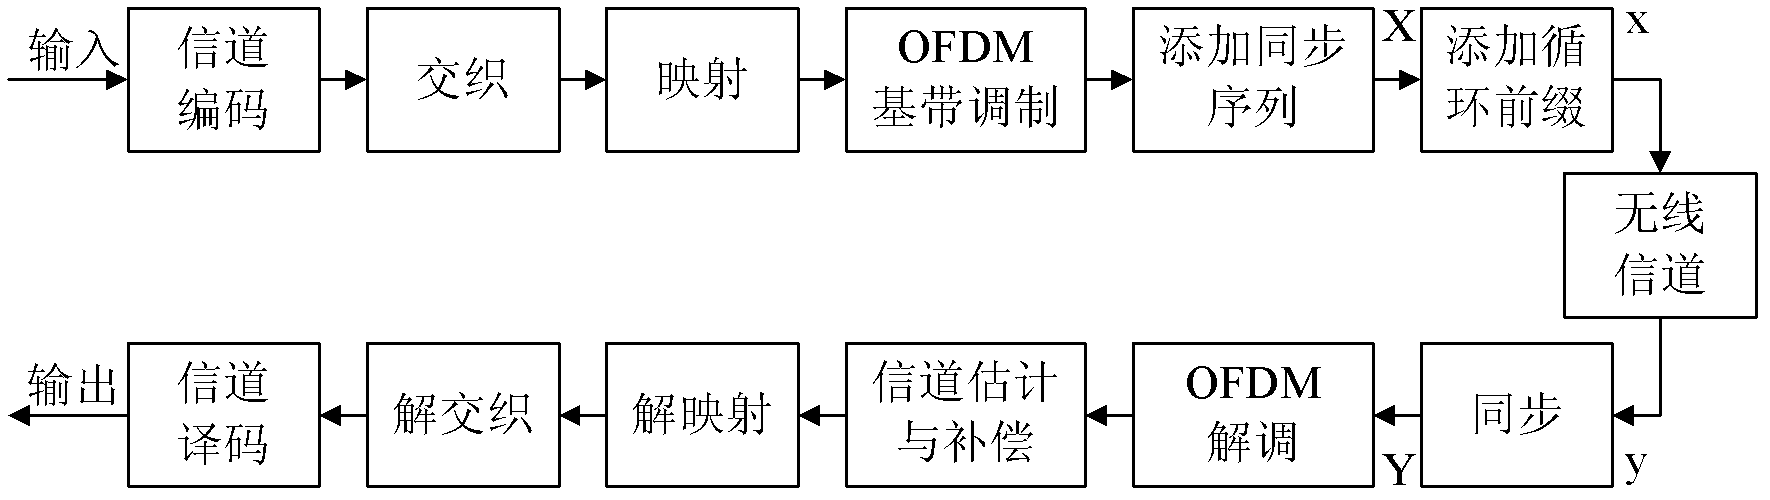 Timing synchronization method of receiver in OFDM wireless communication system